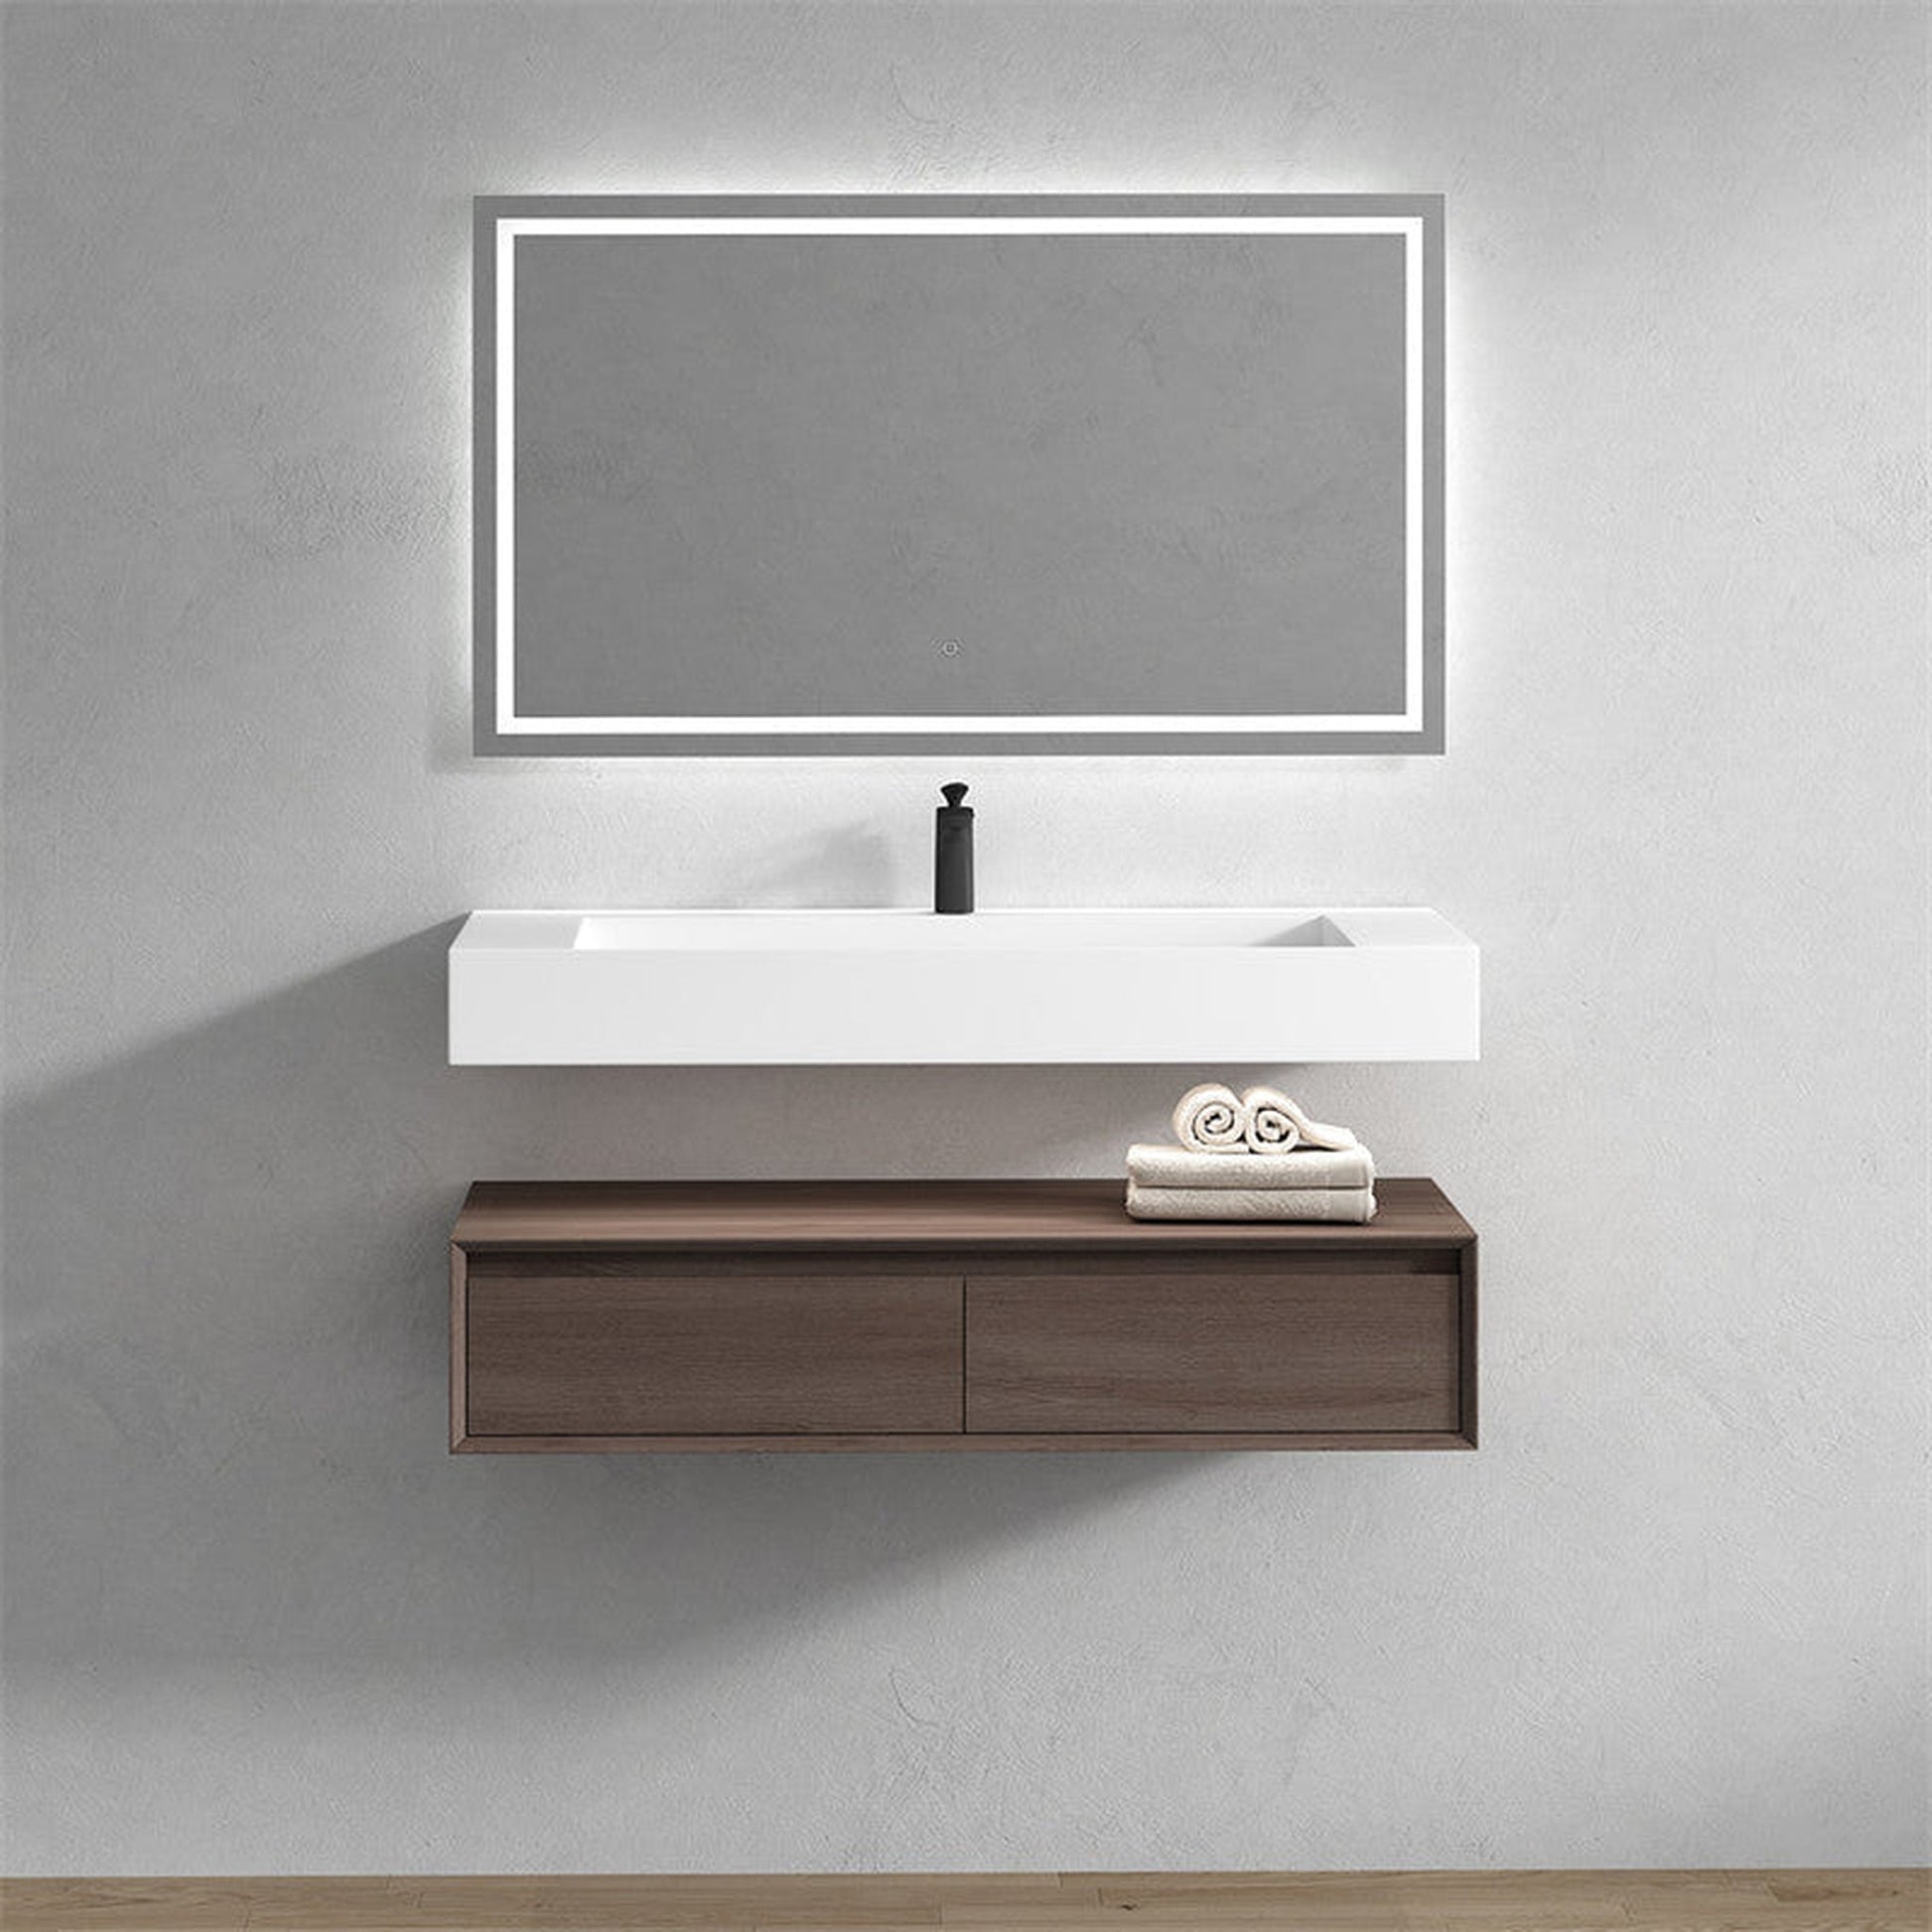 Moreno Bath ALYSA 60" Red Oak Floating Vanity With Single Faucet Hole and Reinforced White Acrylic Sink